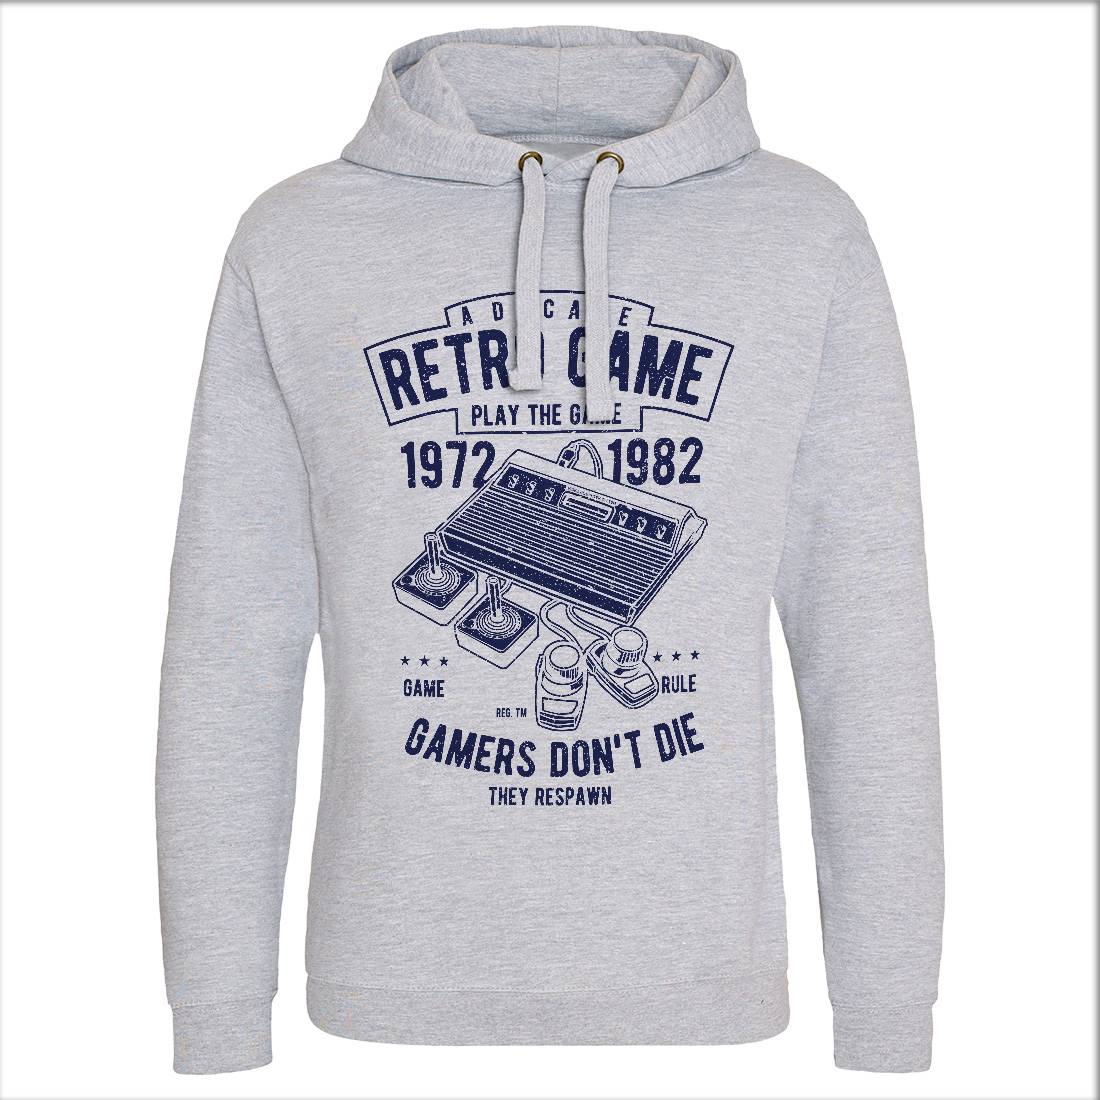 Retro Game Club Mens Hoodie Without Pocket Geek A741